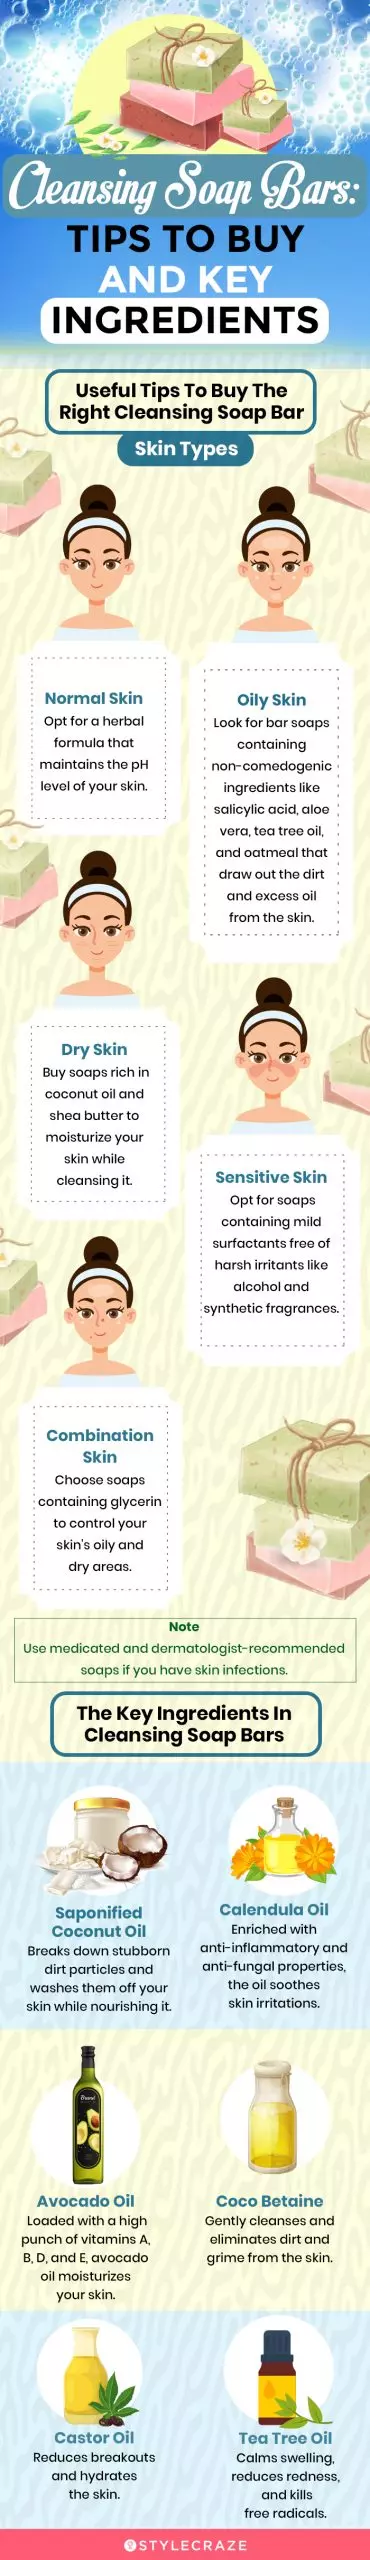 Cleansing Soap Bars: Tips To Buy And Key Ingredients (infographic)